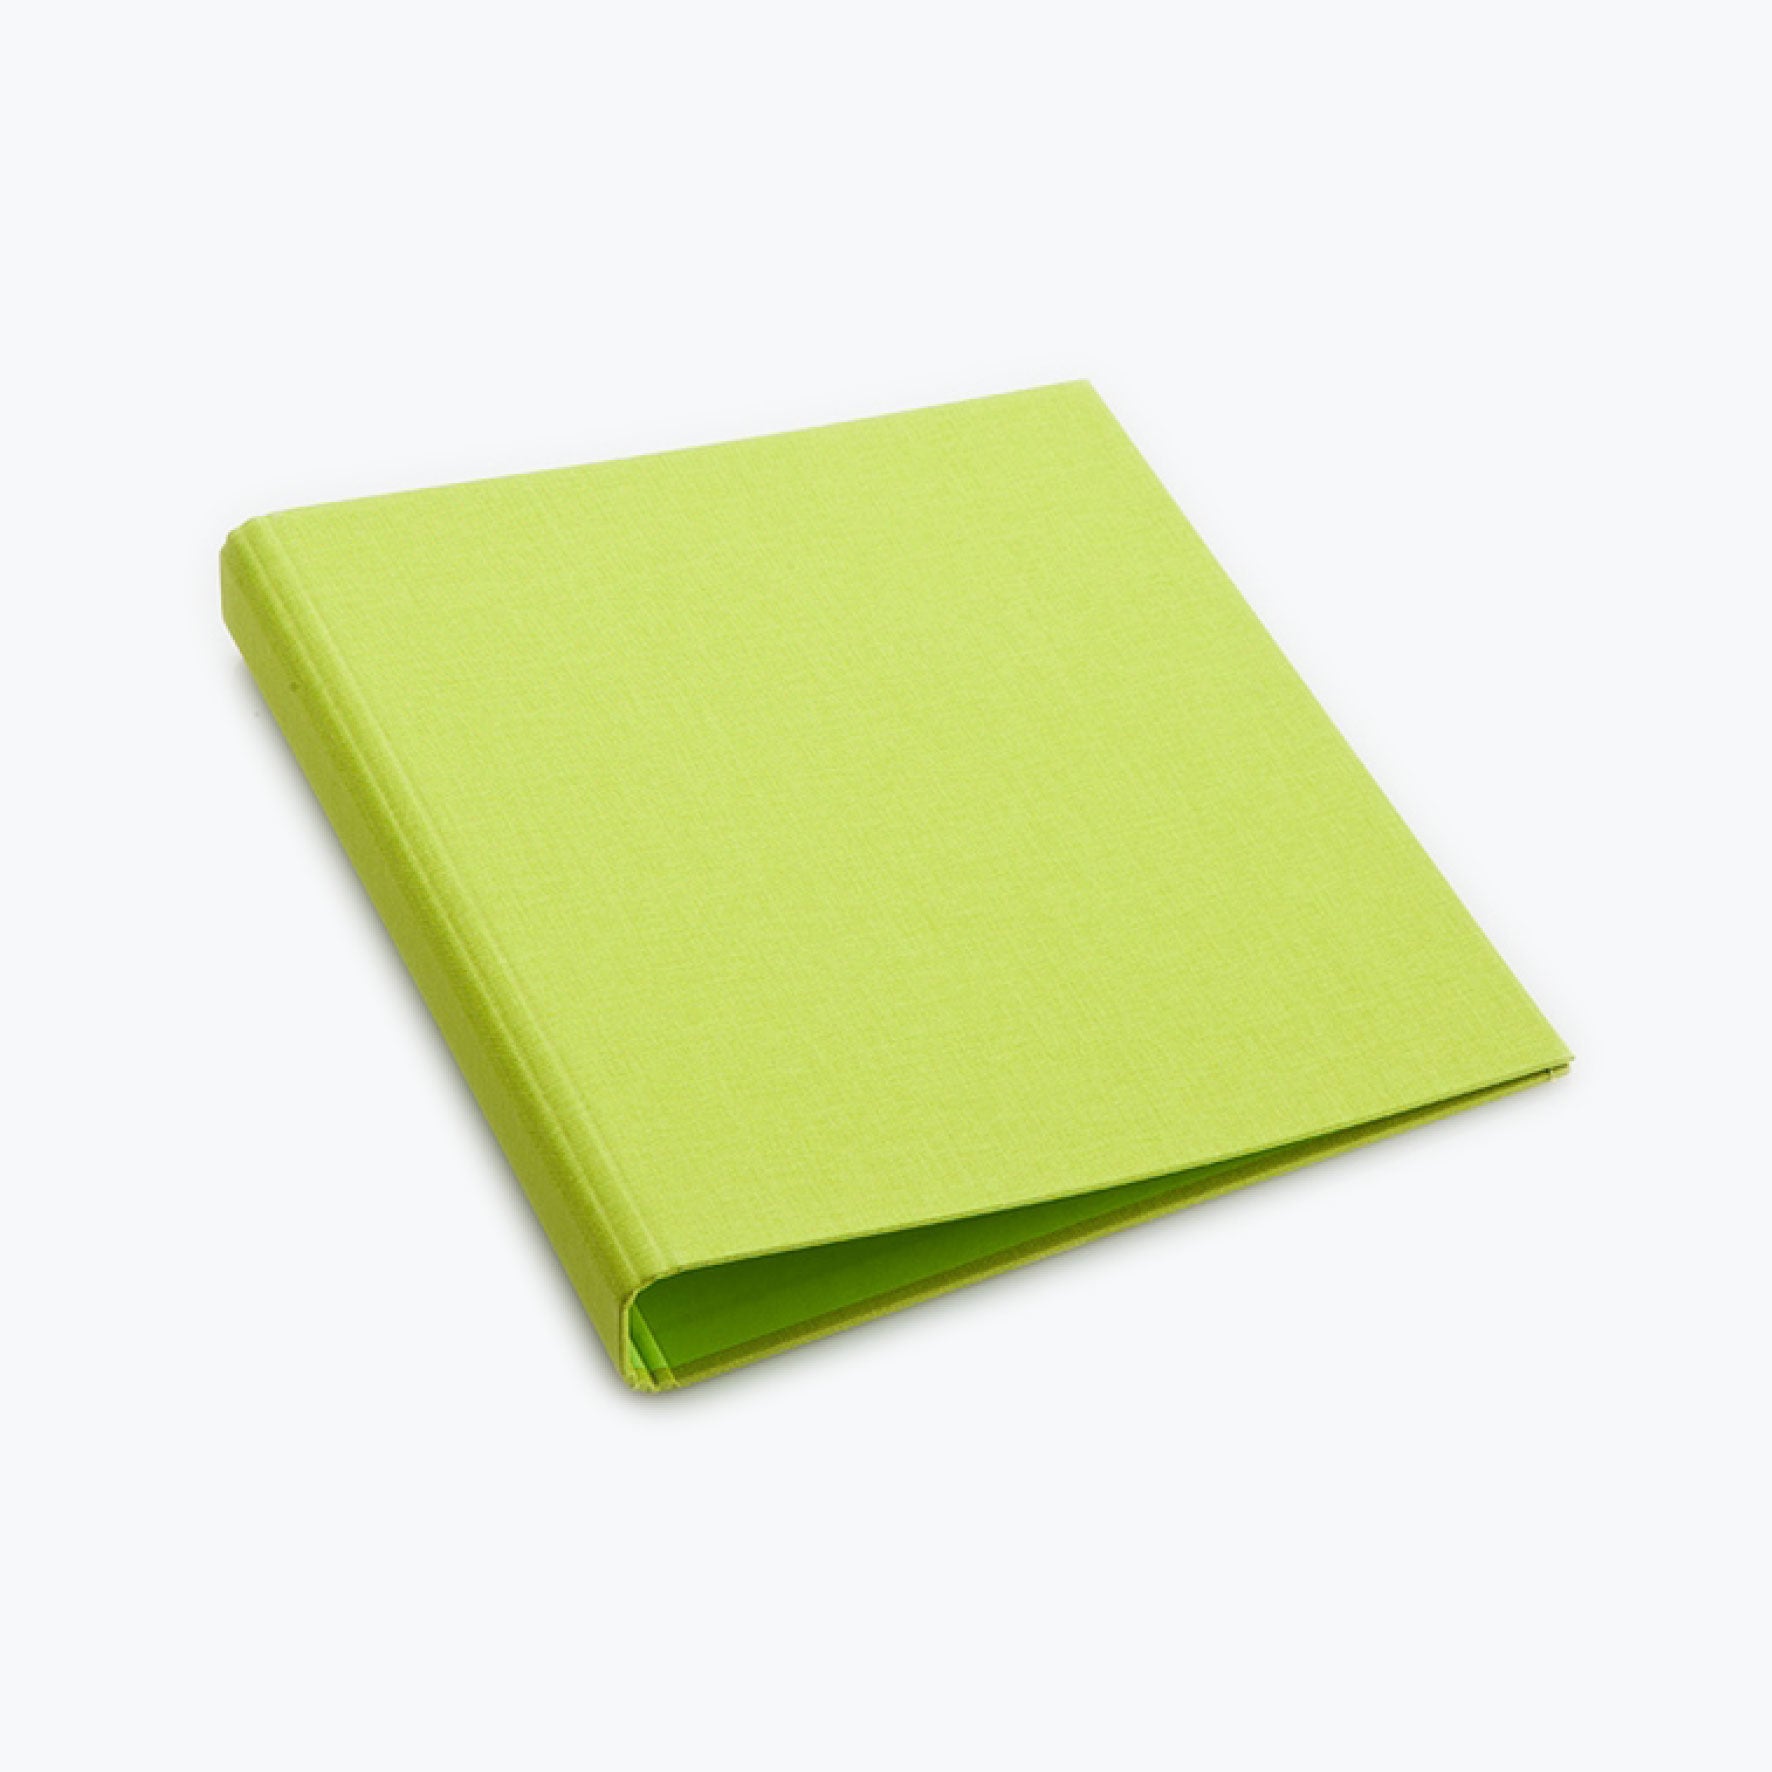 Bookbinders Design - Cloth Ringbinder - A4 - Apple Green <Outgoing>